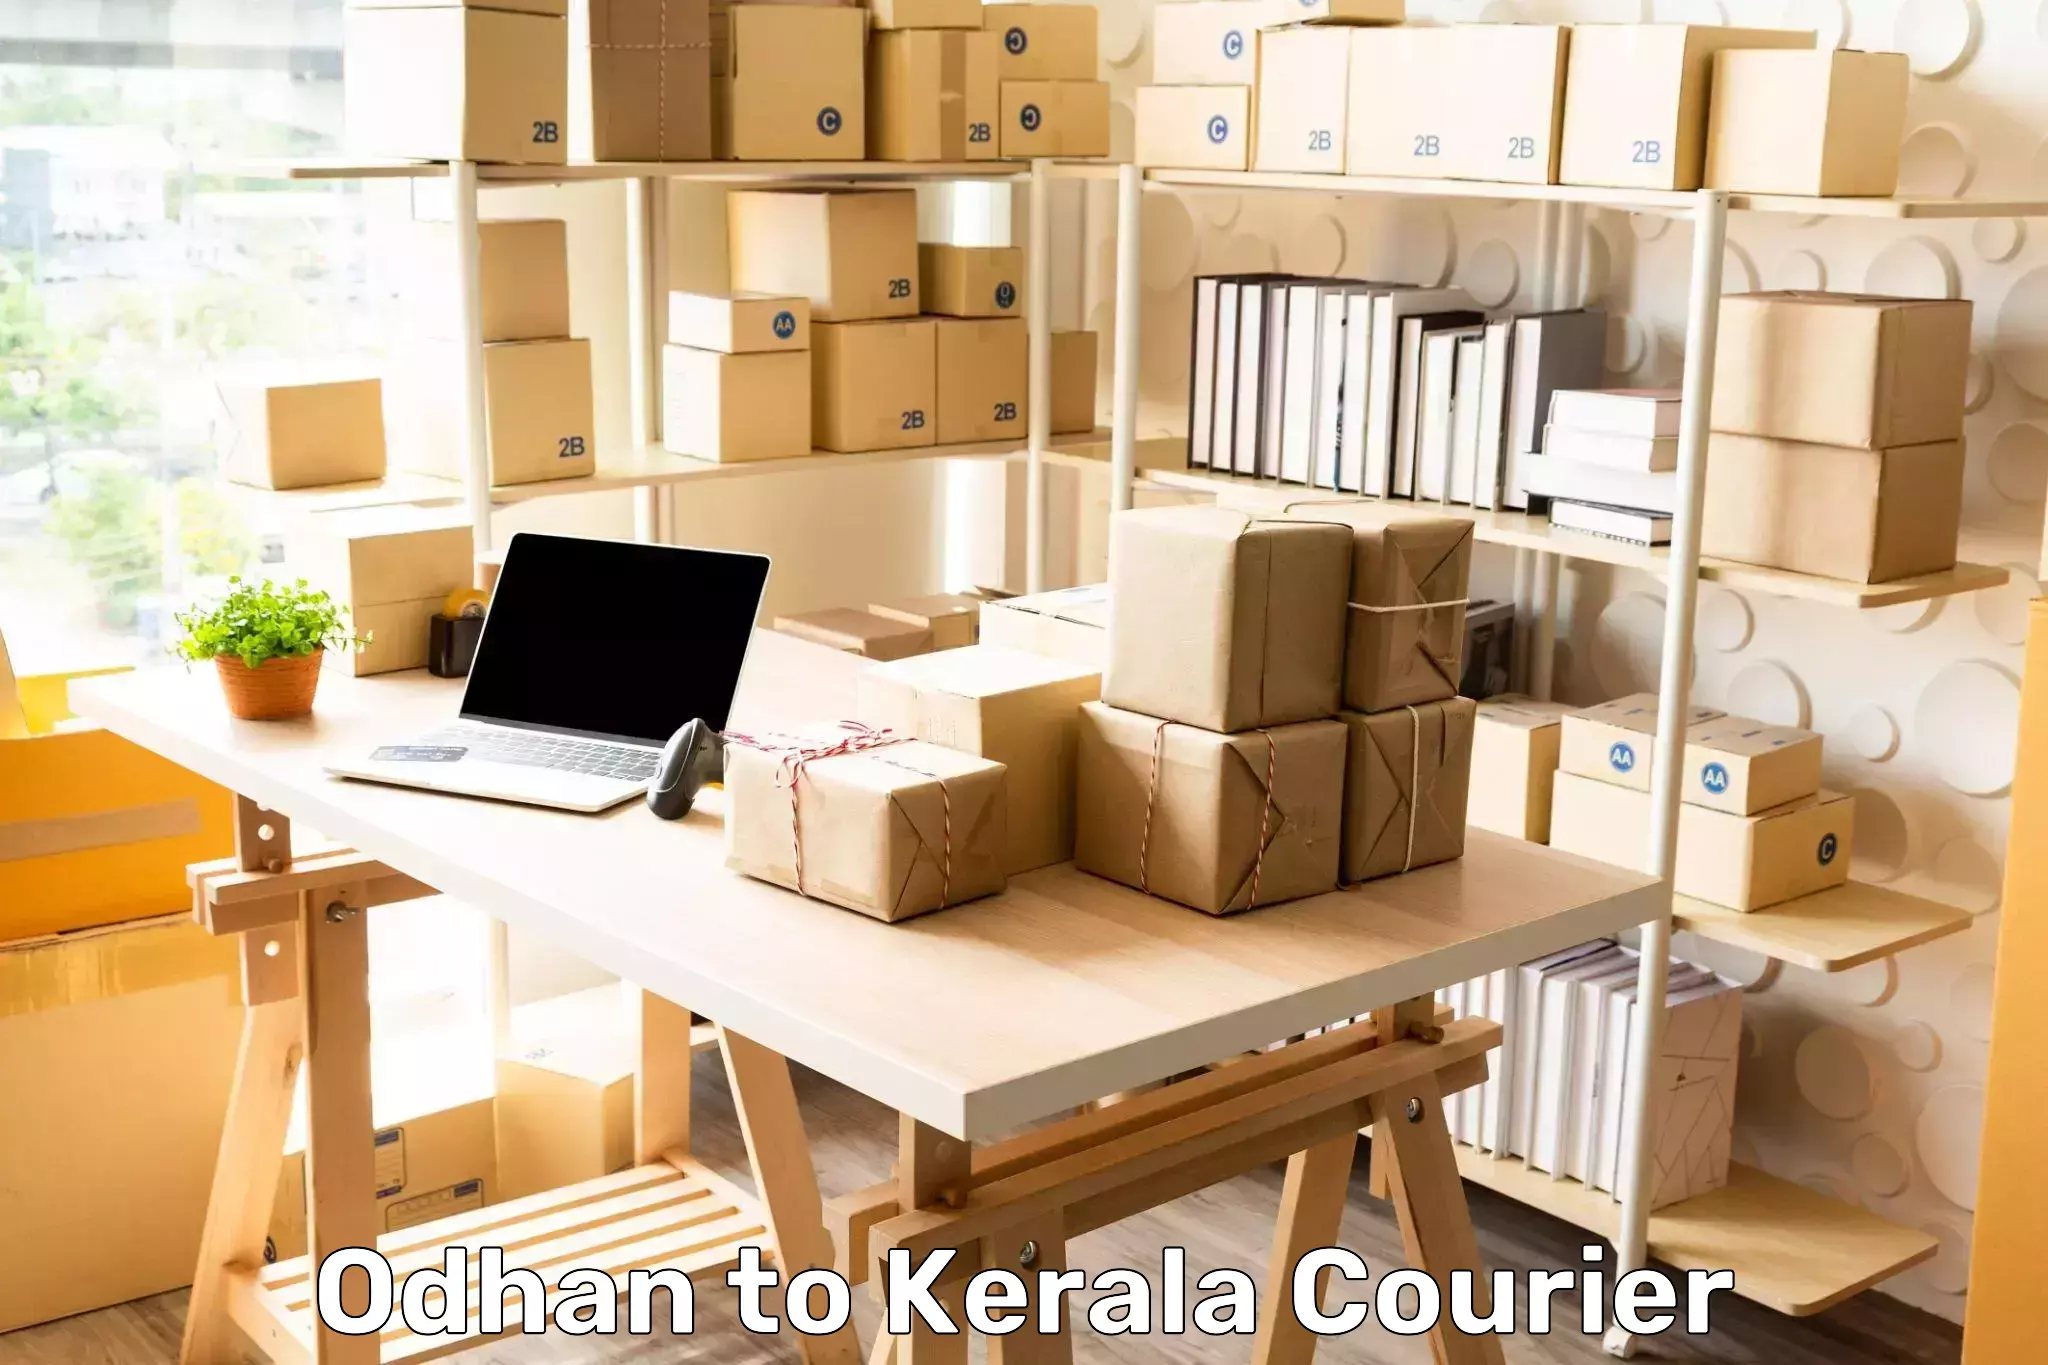 High-speed logistics services Odhan to Kerala